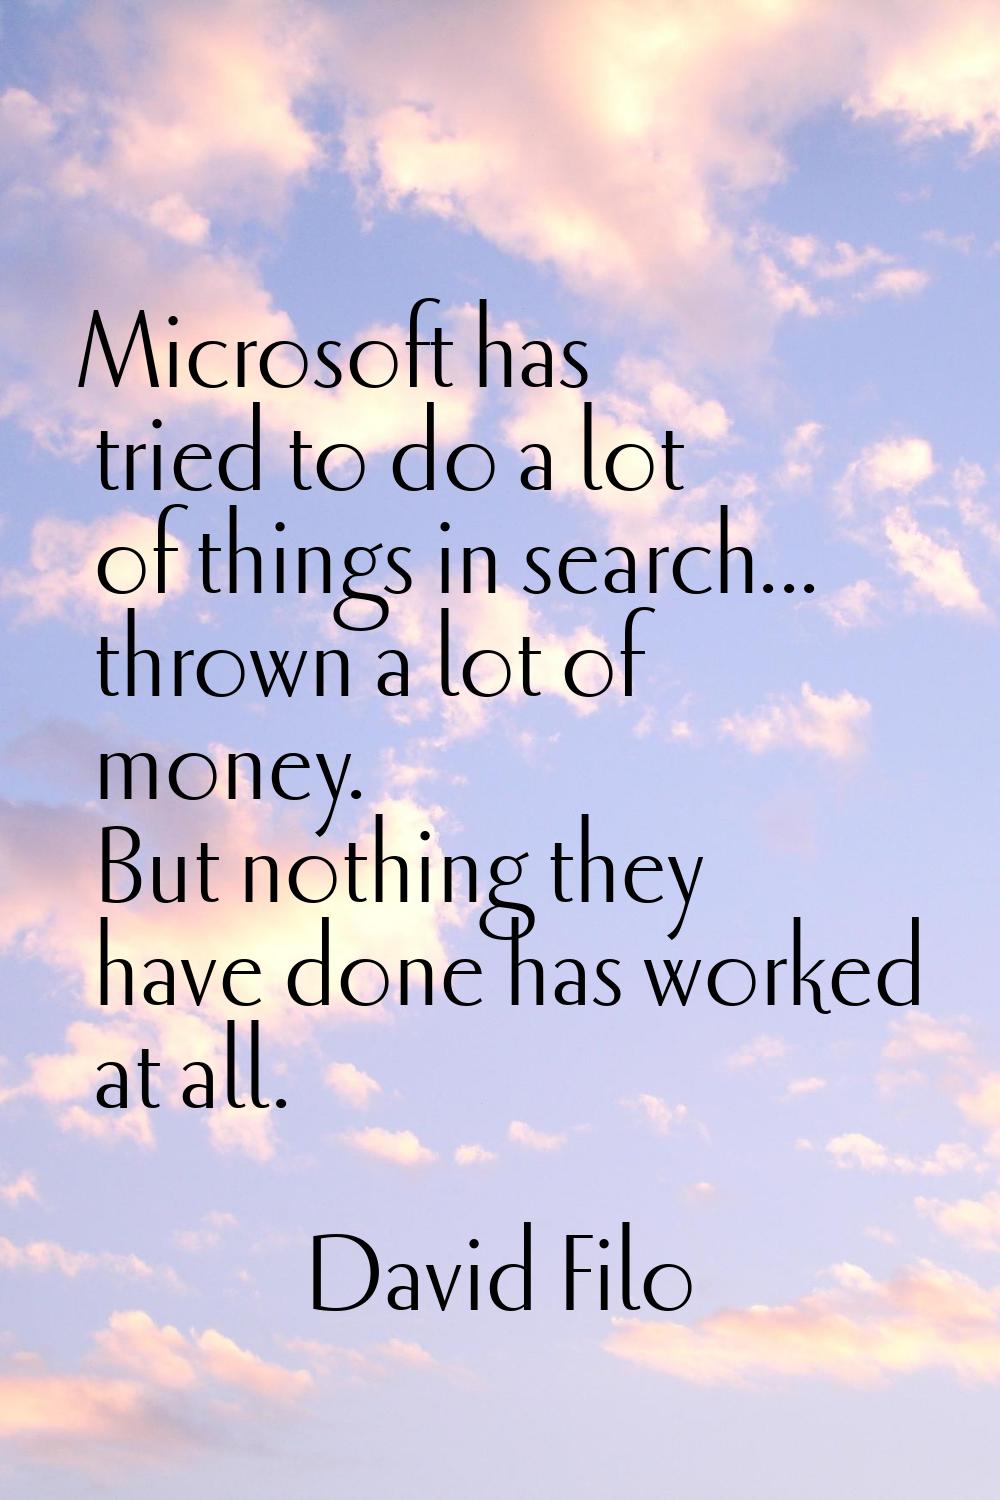 Microsoft has tried to do a lot of things in search... thrown a lot of money. But nothing they have